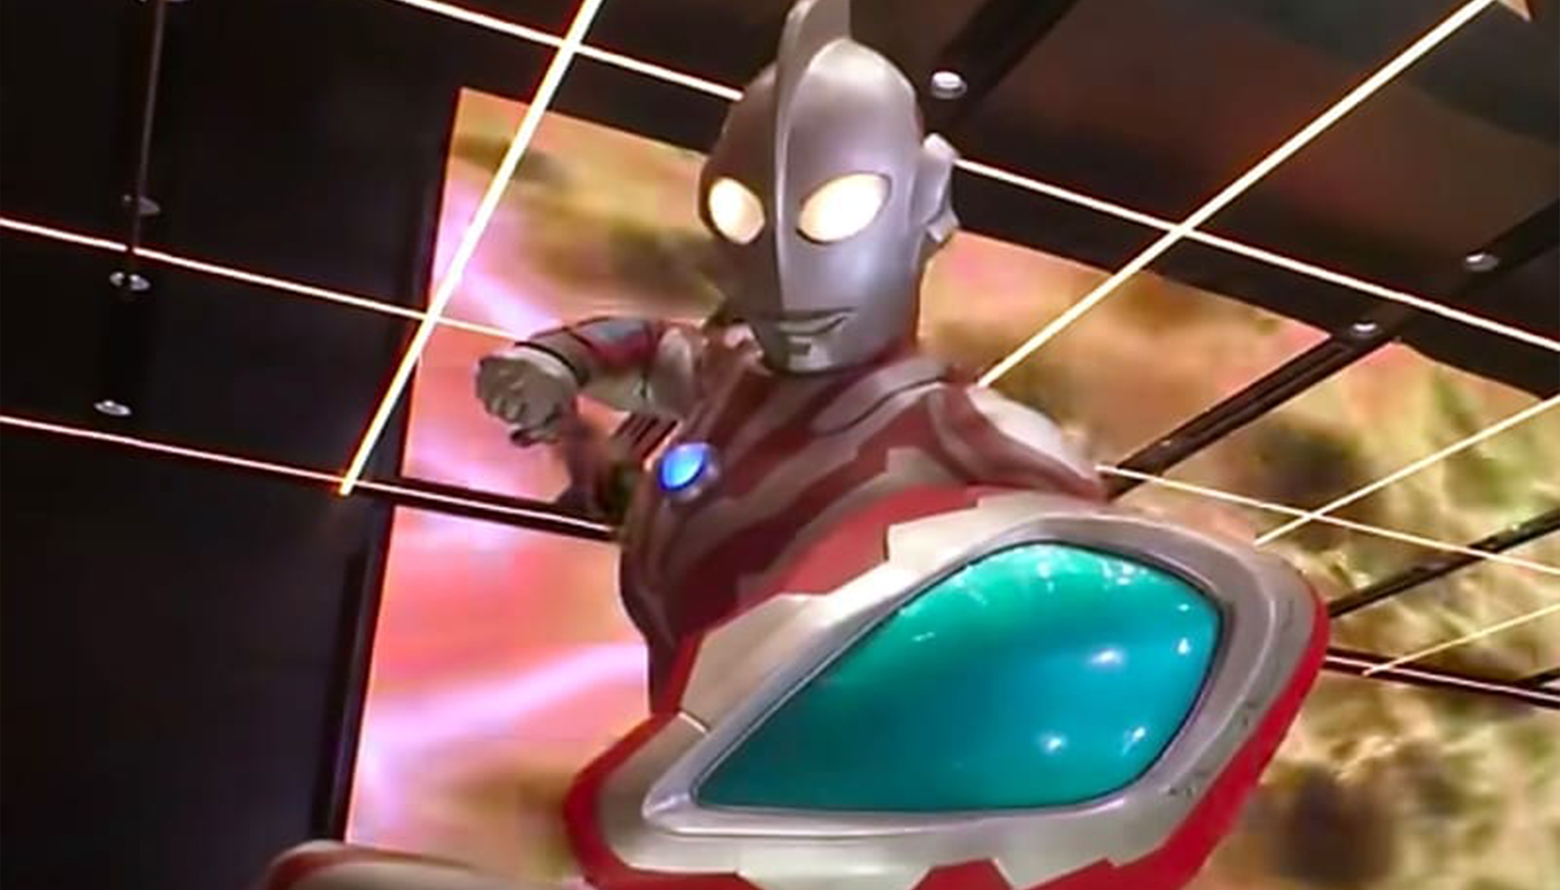 ULTRAMAN EVENT PACKAGE TO INCLUDE LIVESTREAM & FLOOR SHOWS